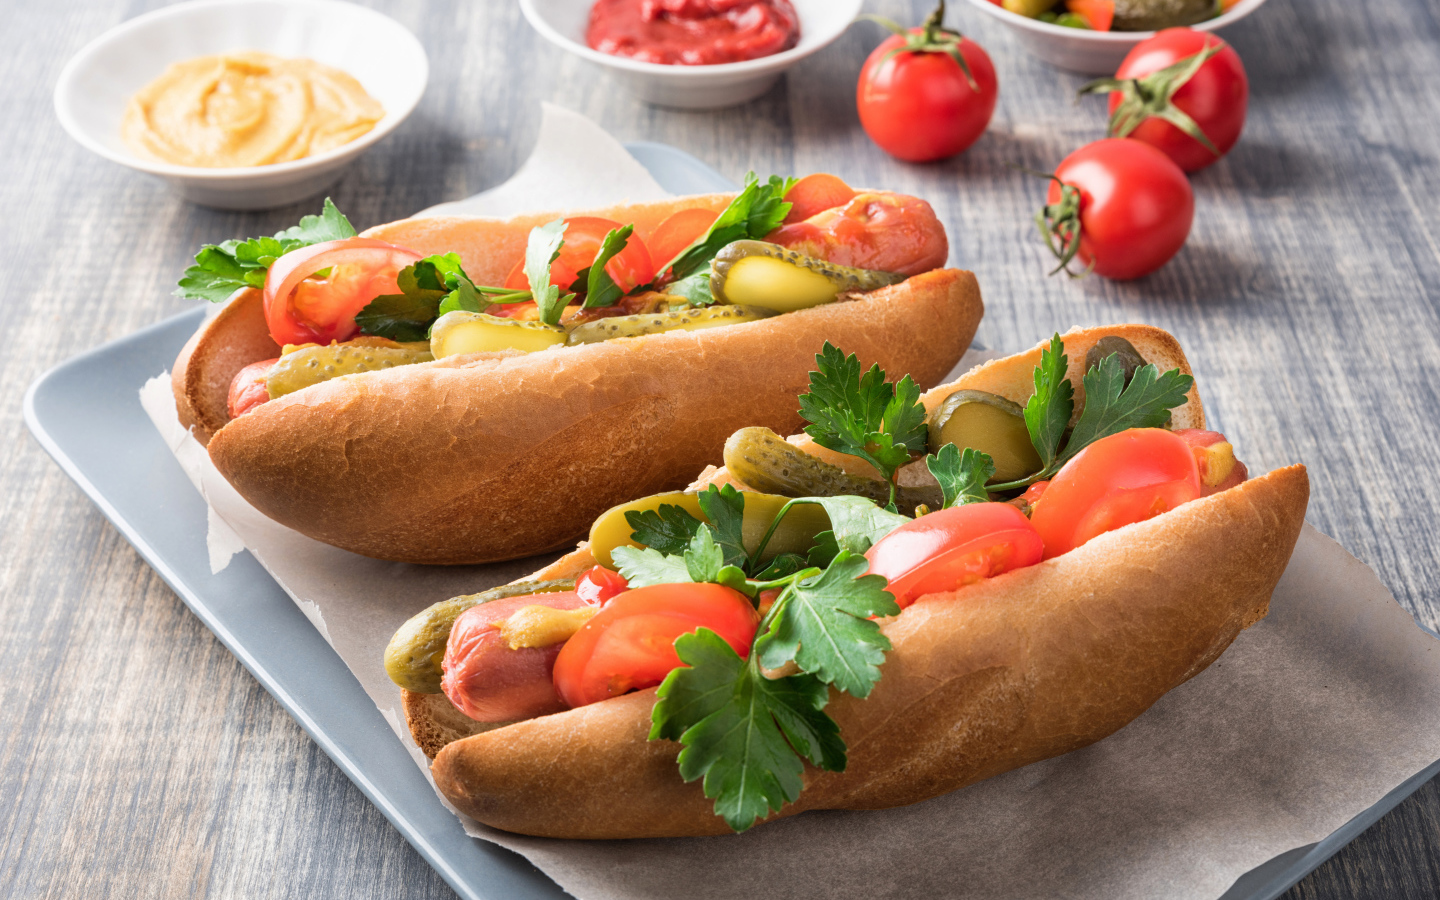 Two hotdogs with sausage, cucumbers and tomatoes